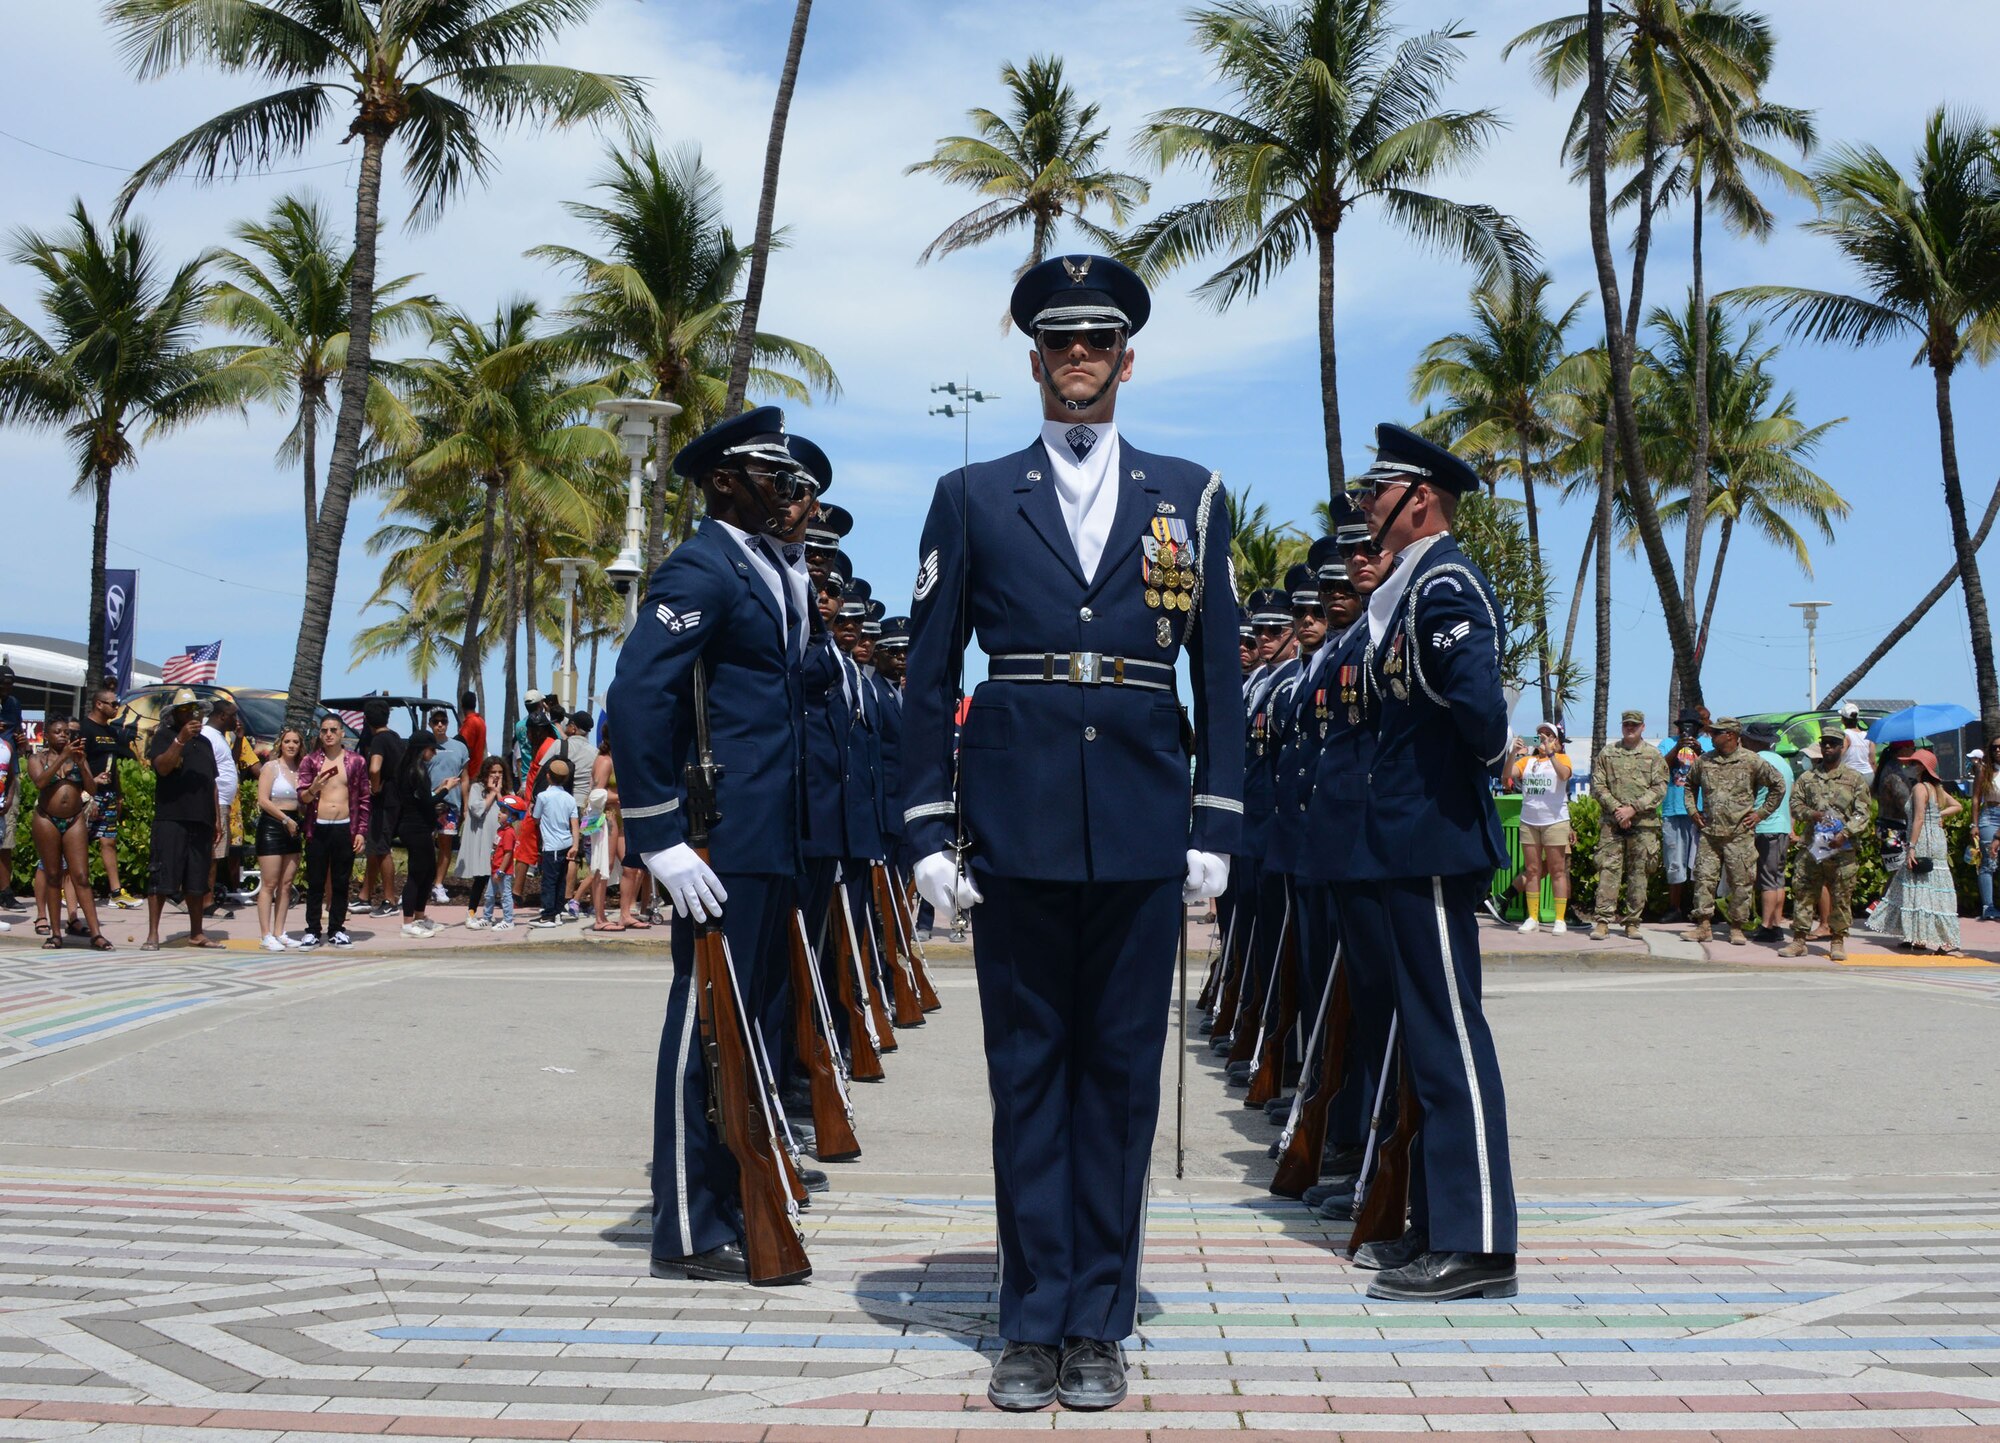 The Air Force Honor Guard, Joint Base Anacostia-Bolling, Washington D.C., was one of many Air Force performances at the Miami Air Show, May 28, 2021.